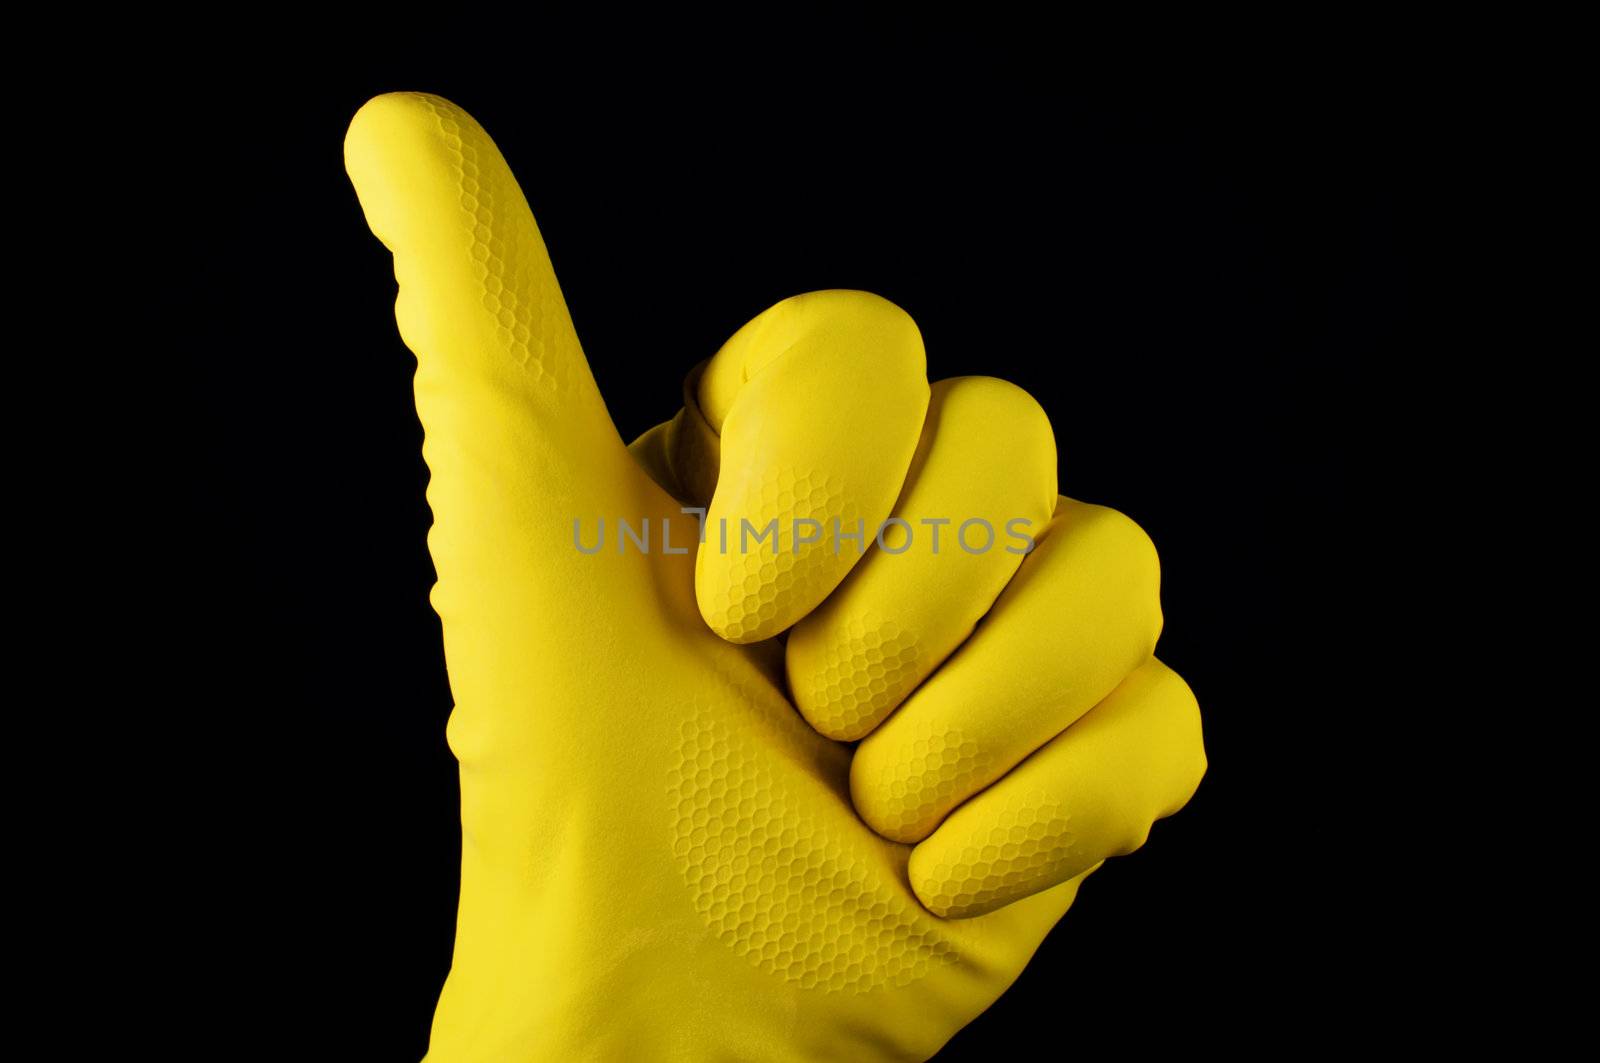 Thumb up in yellow rubber glove by Nanisimova